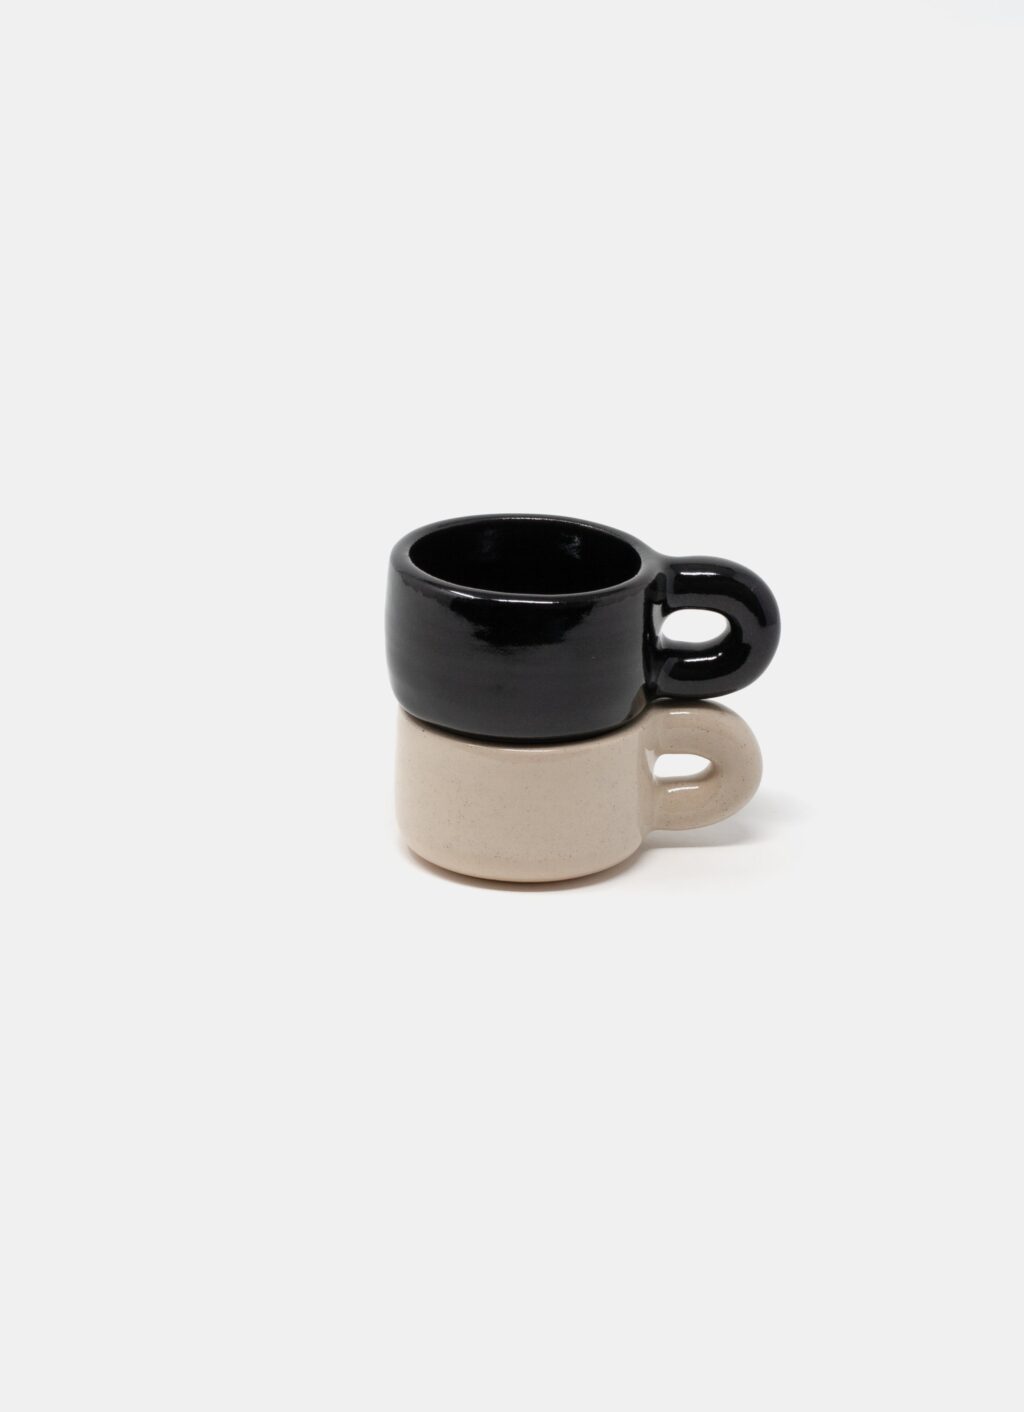 Mugs Mini Hand Painted Espresso Cups With Gold Handle Ceramic